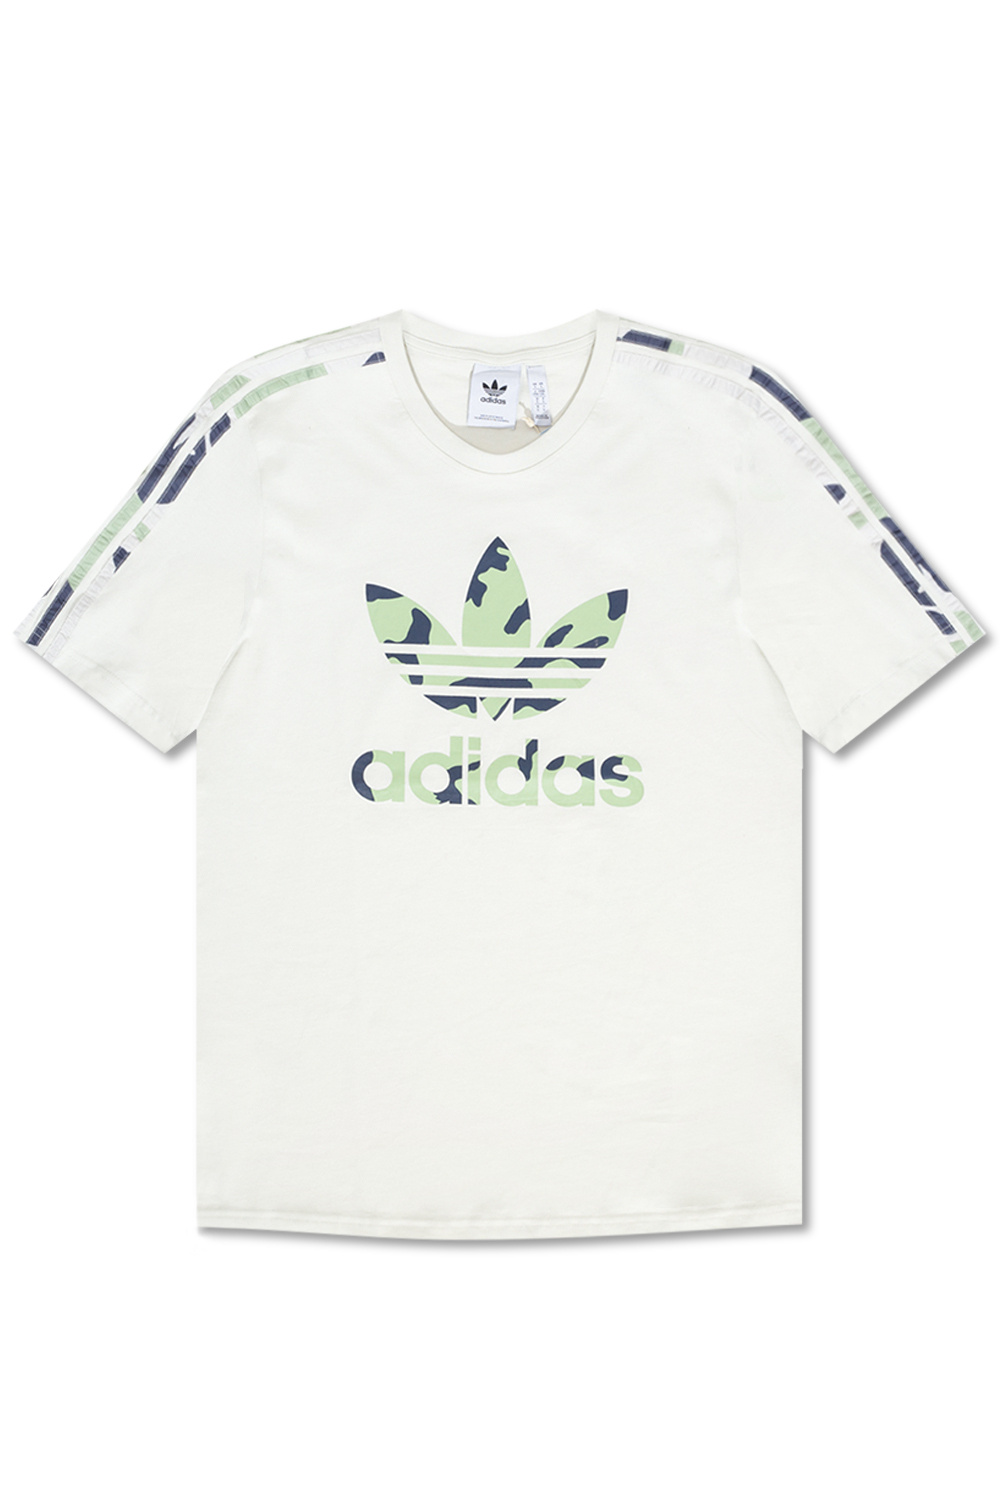 ADIDAS Originals adidas crate and pillow size inches chart online